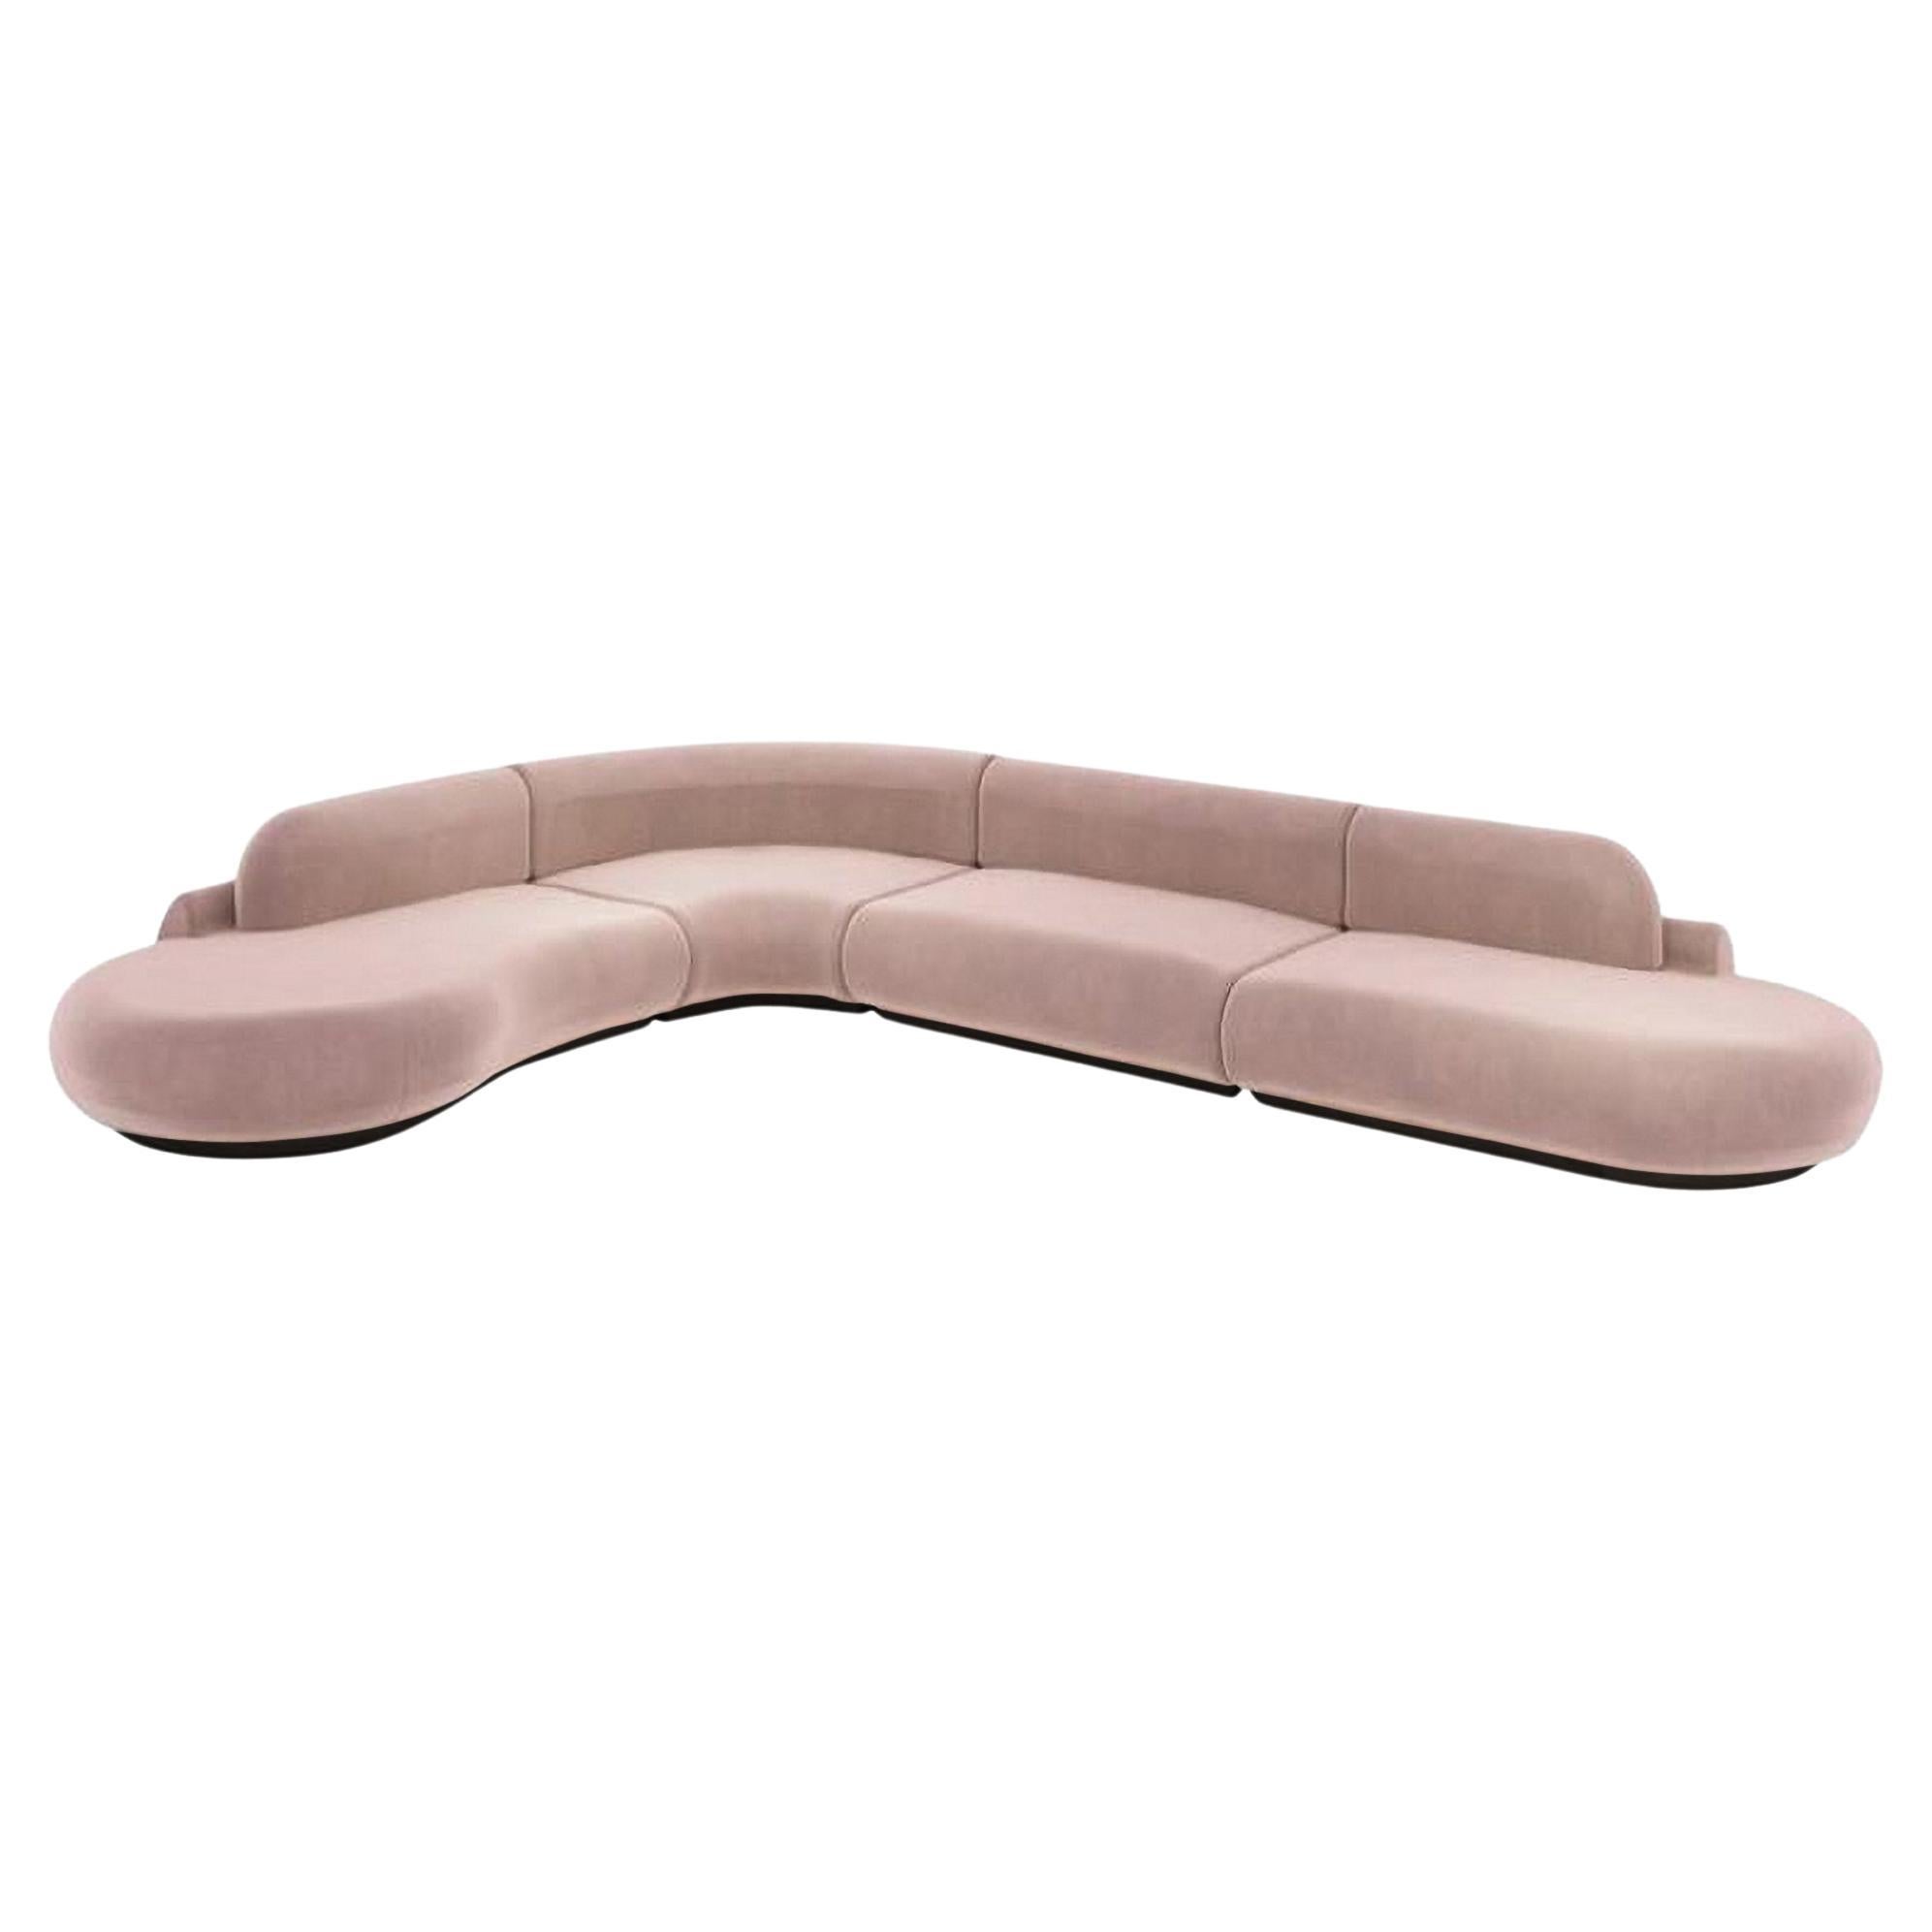 Naked Sectional Sofa, 4 Piece with Beech Ash-056-5 and Paris Mouse For Sale